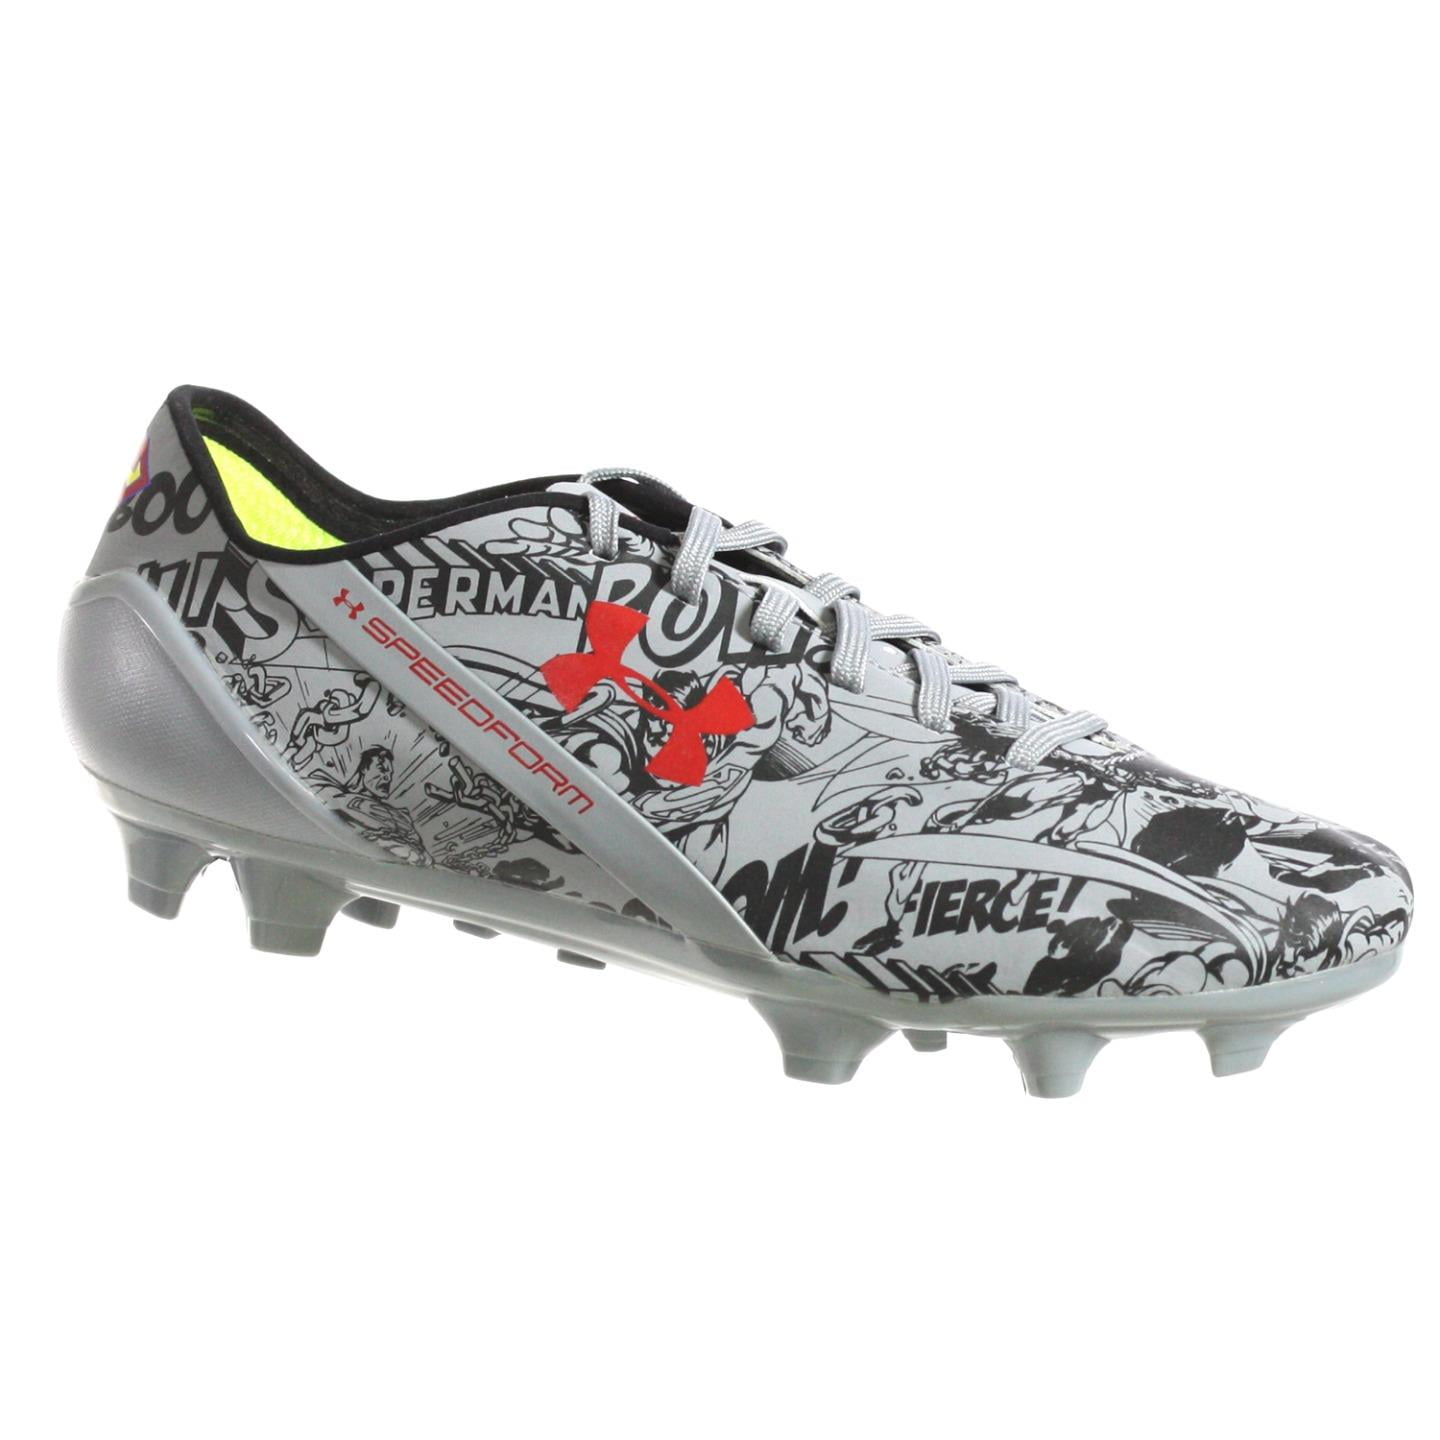 superman cleats youth